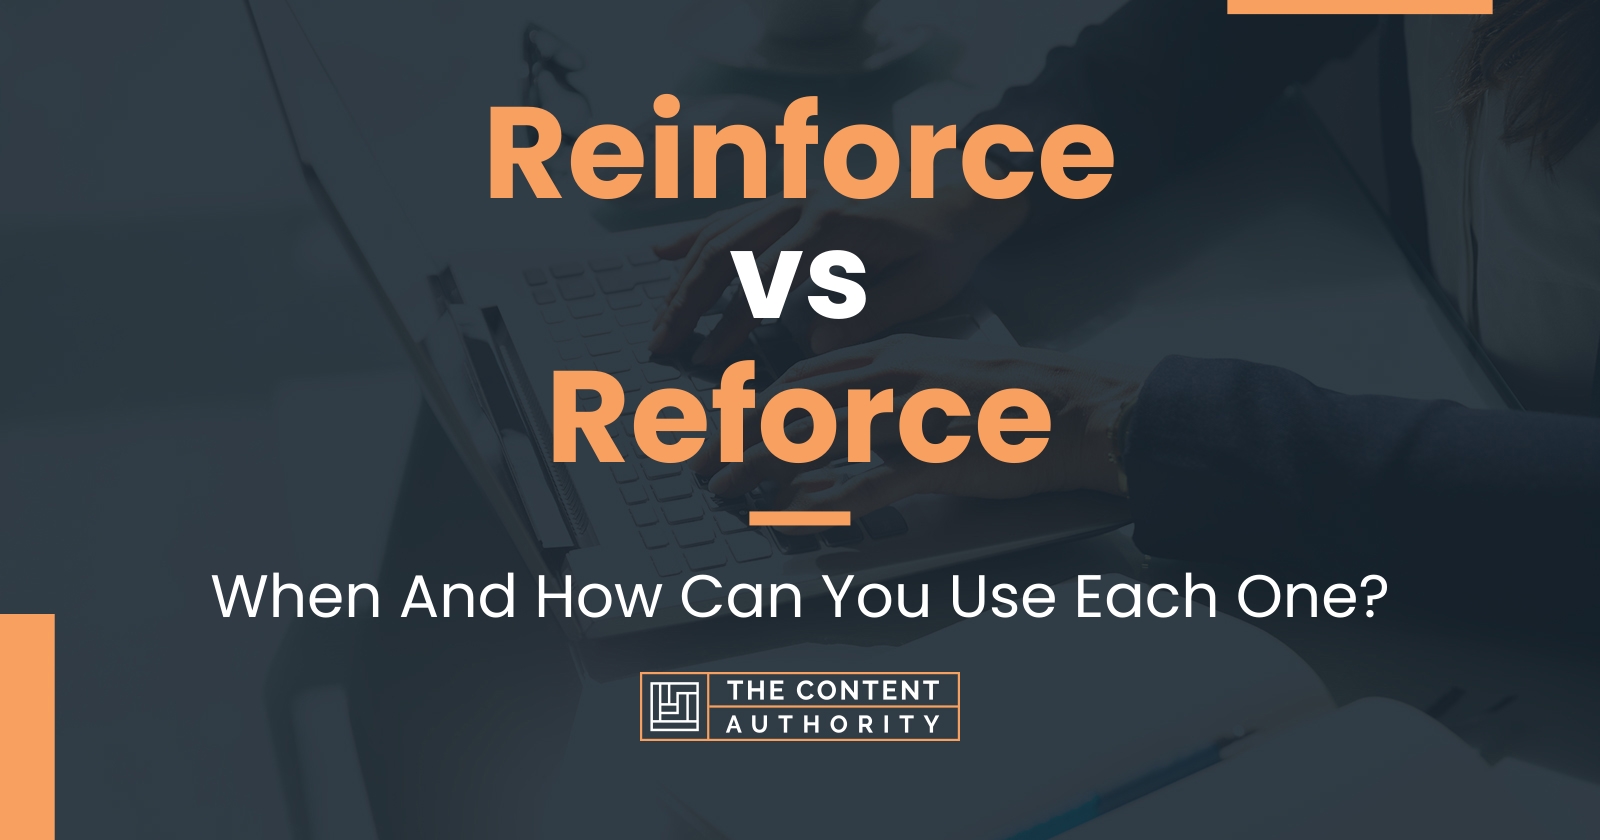 Reinforce vs Reforce: When And How Can You Use Each One?